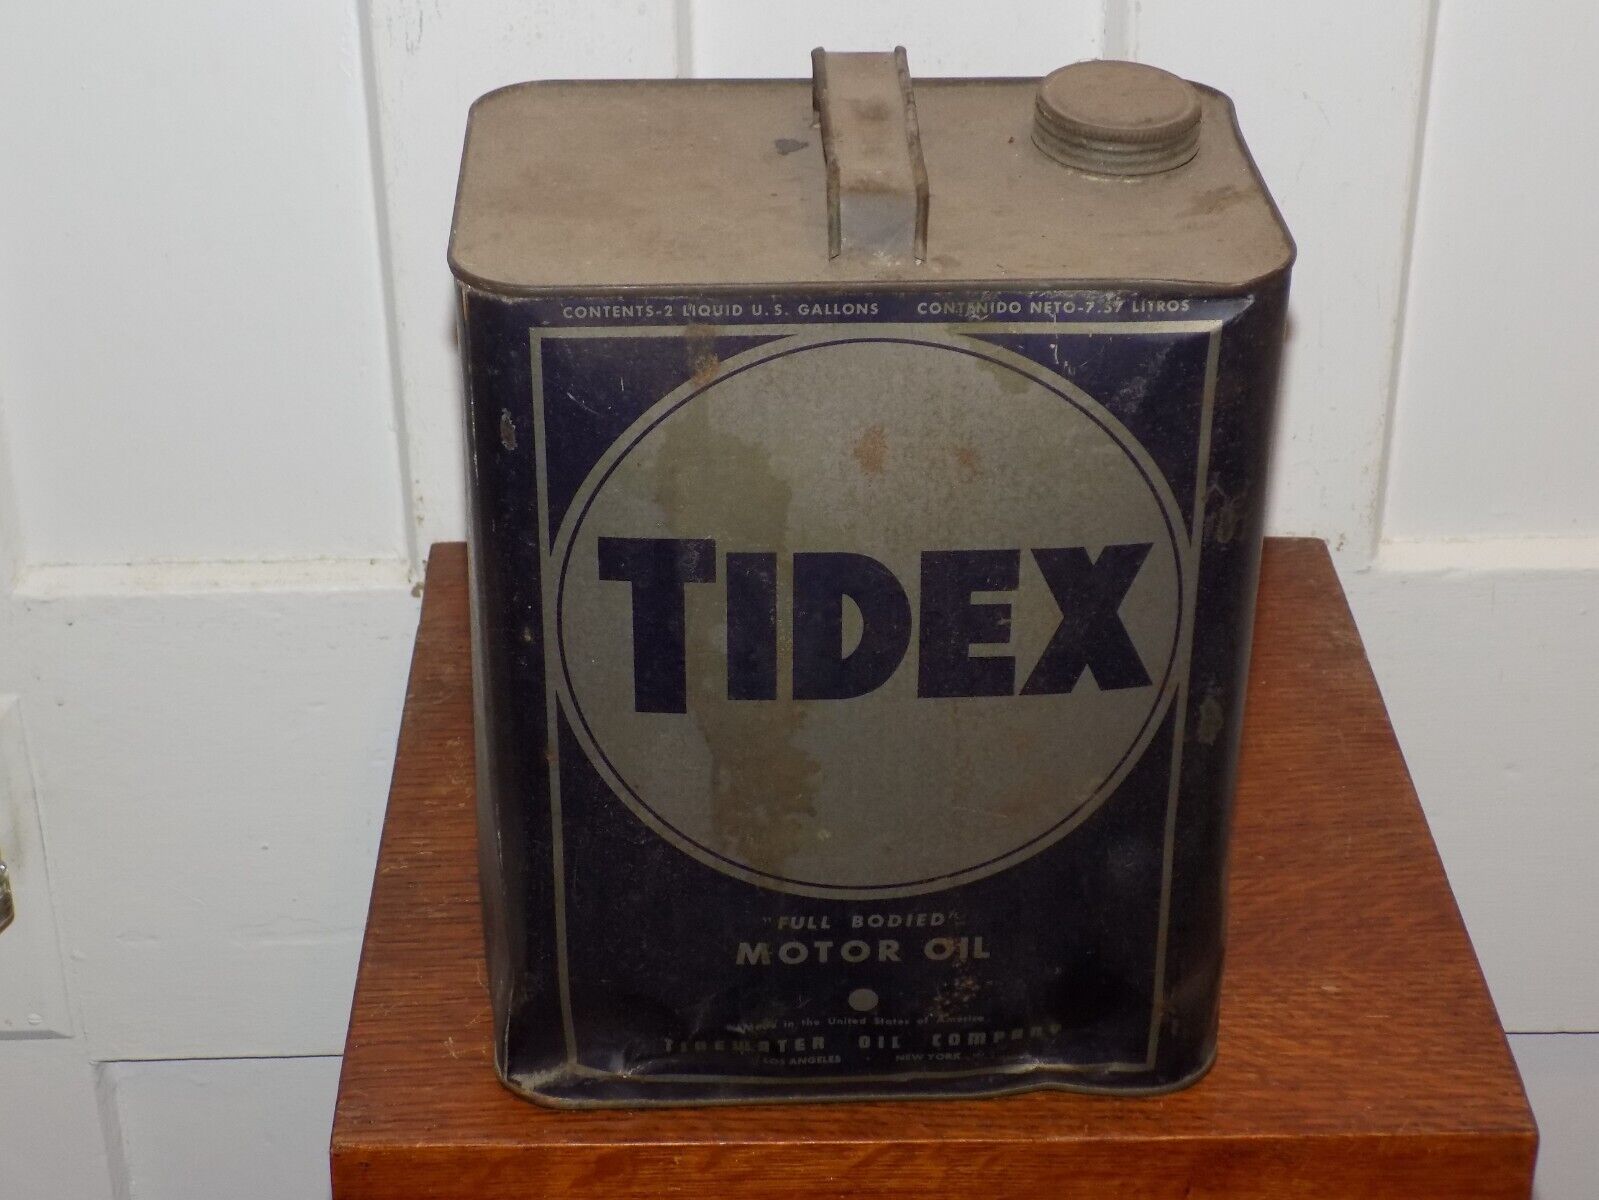 Vintage Tidex Two Gallon Empty Oil Can by Tidewater Oil Company